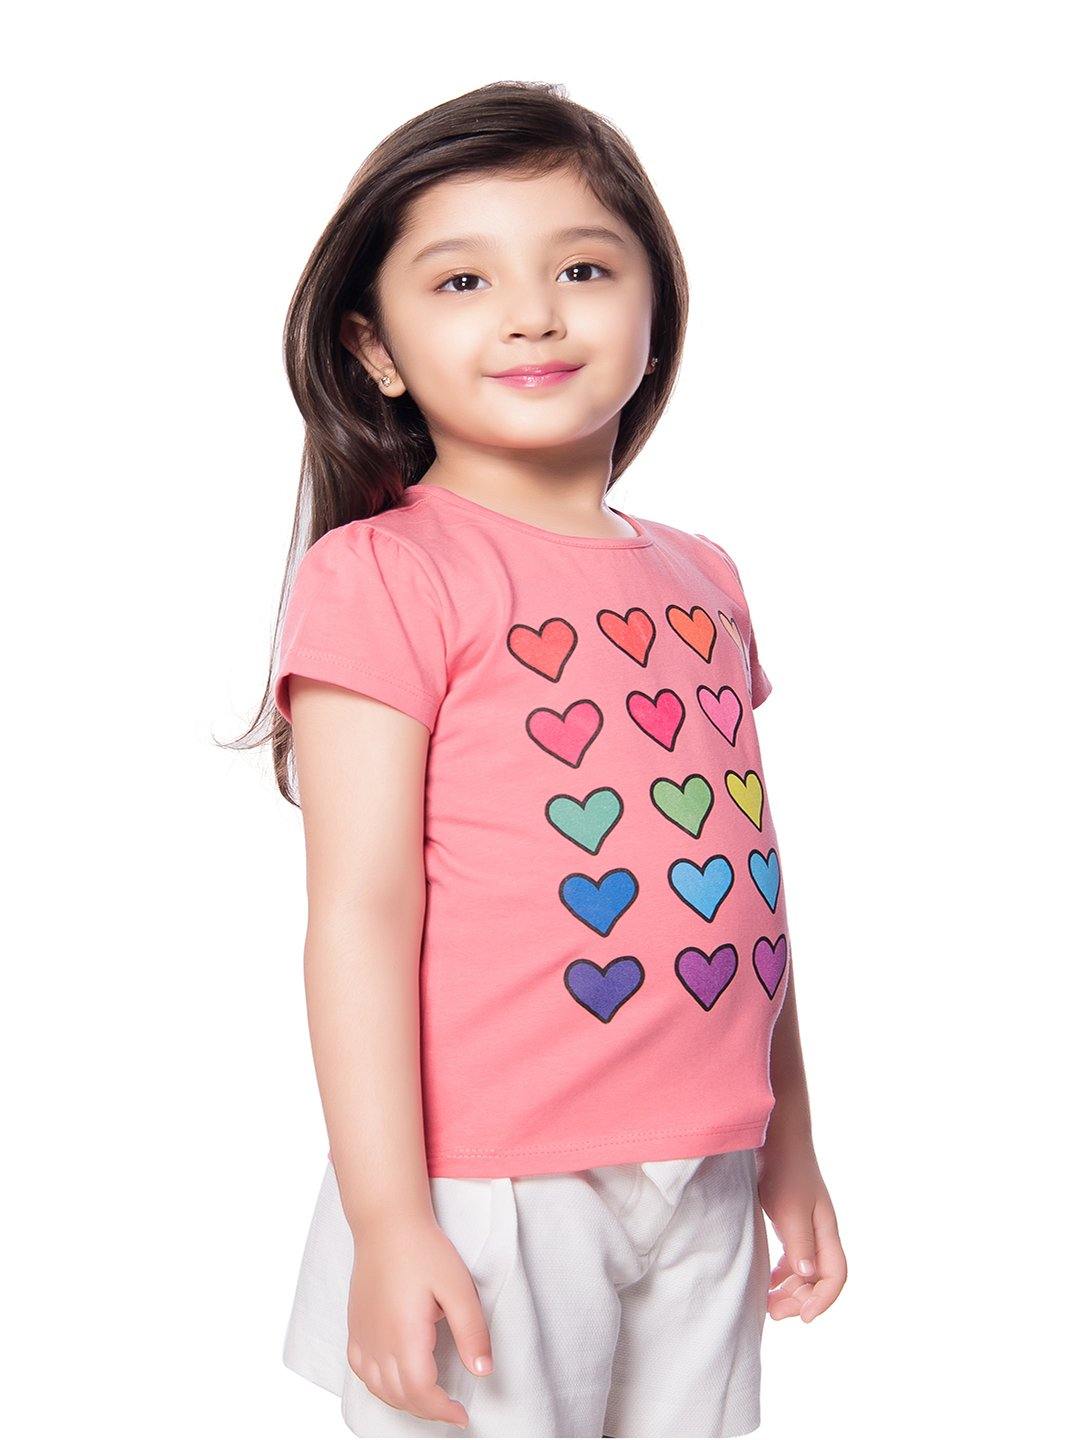 Tiny Baby Peach Colored Top - T-107 Peach - TINY BABY INDIA shop.tinybaby.in